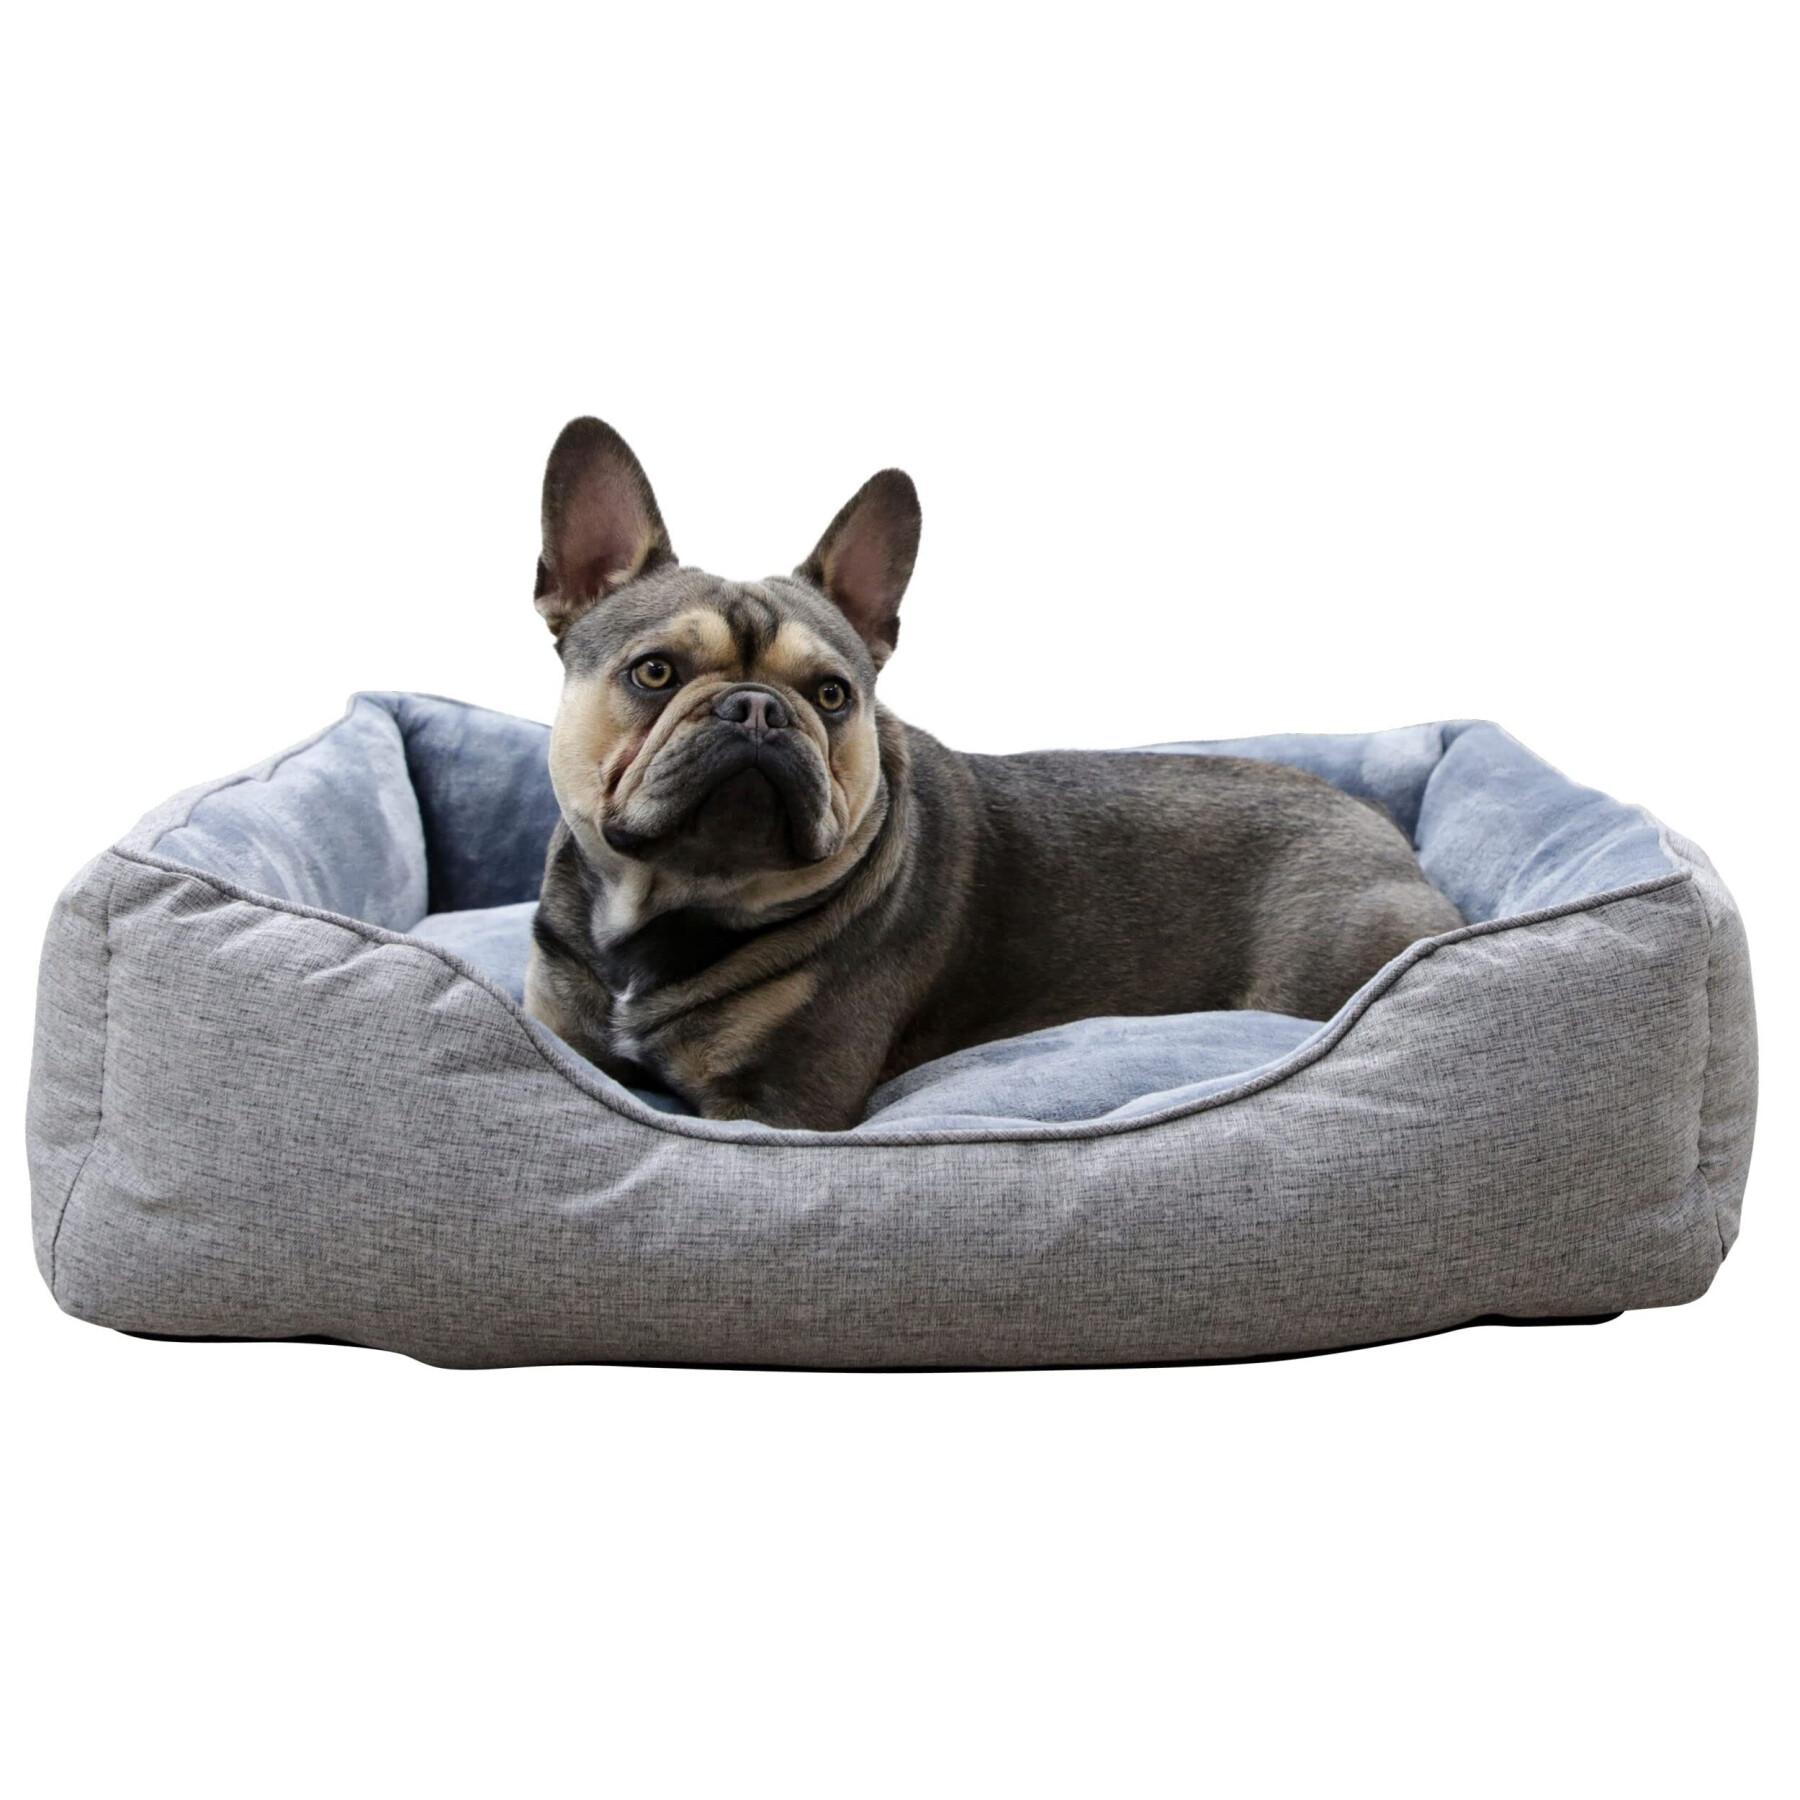 Cozy dog bed Kerbl Marie